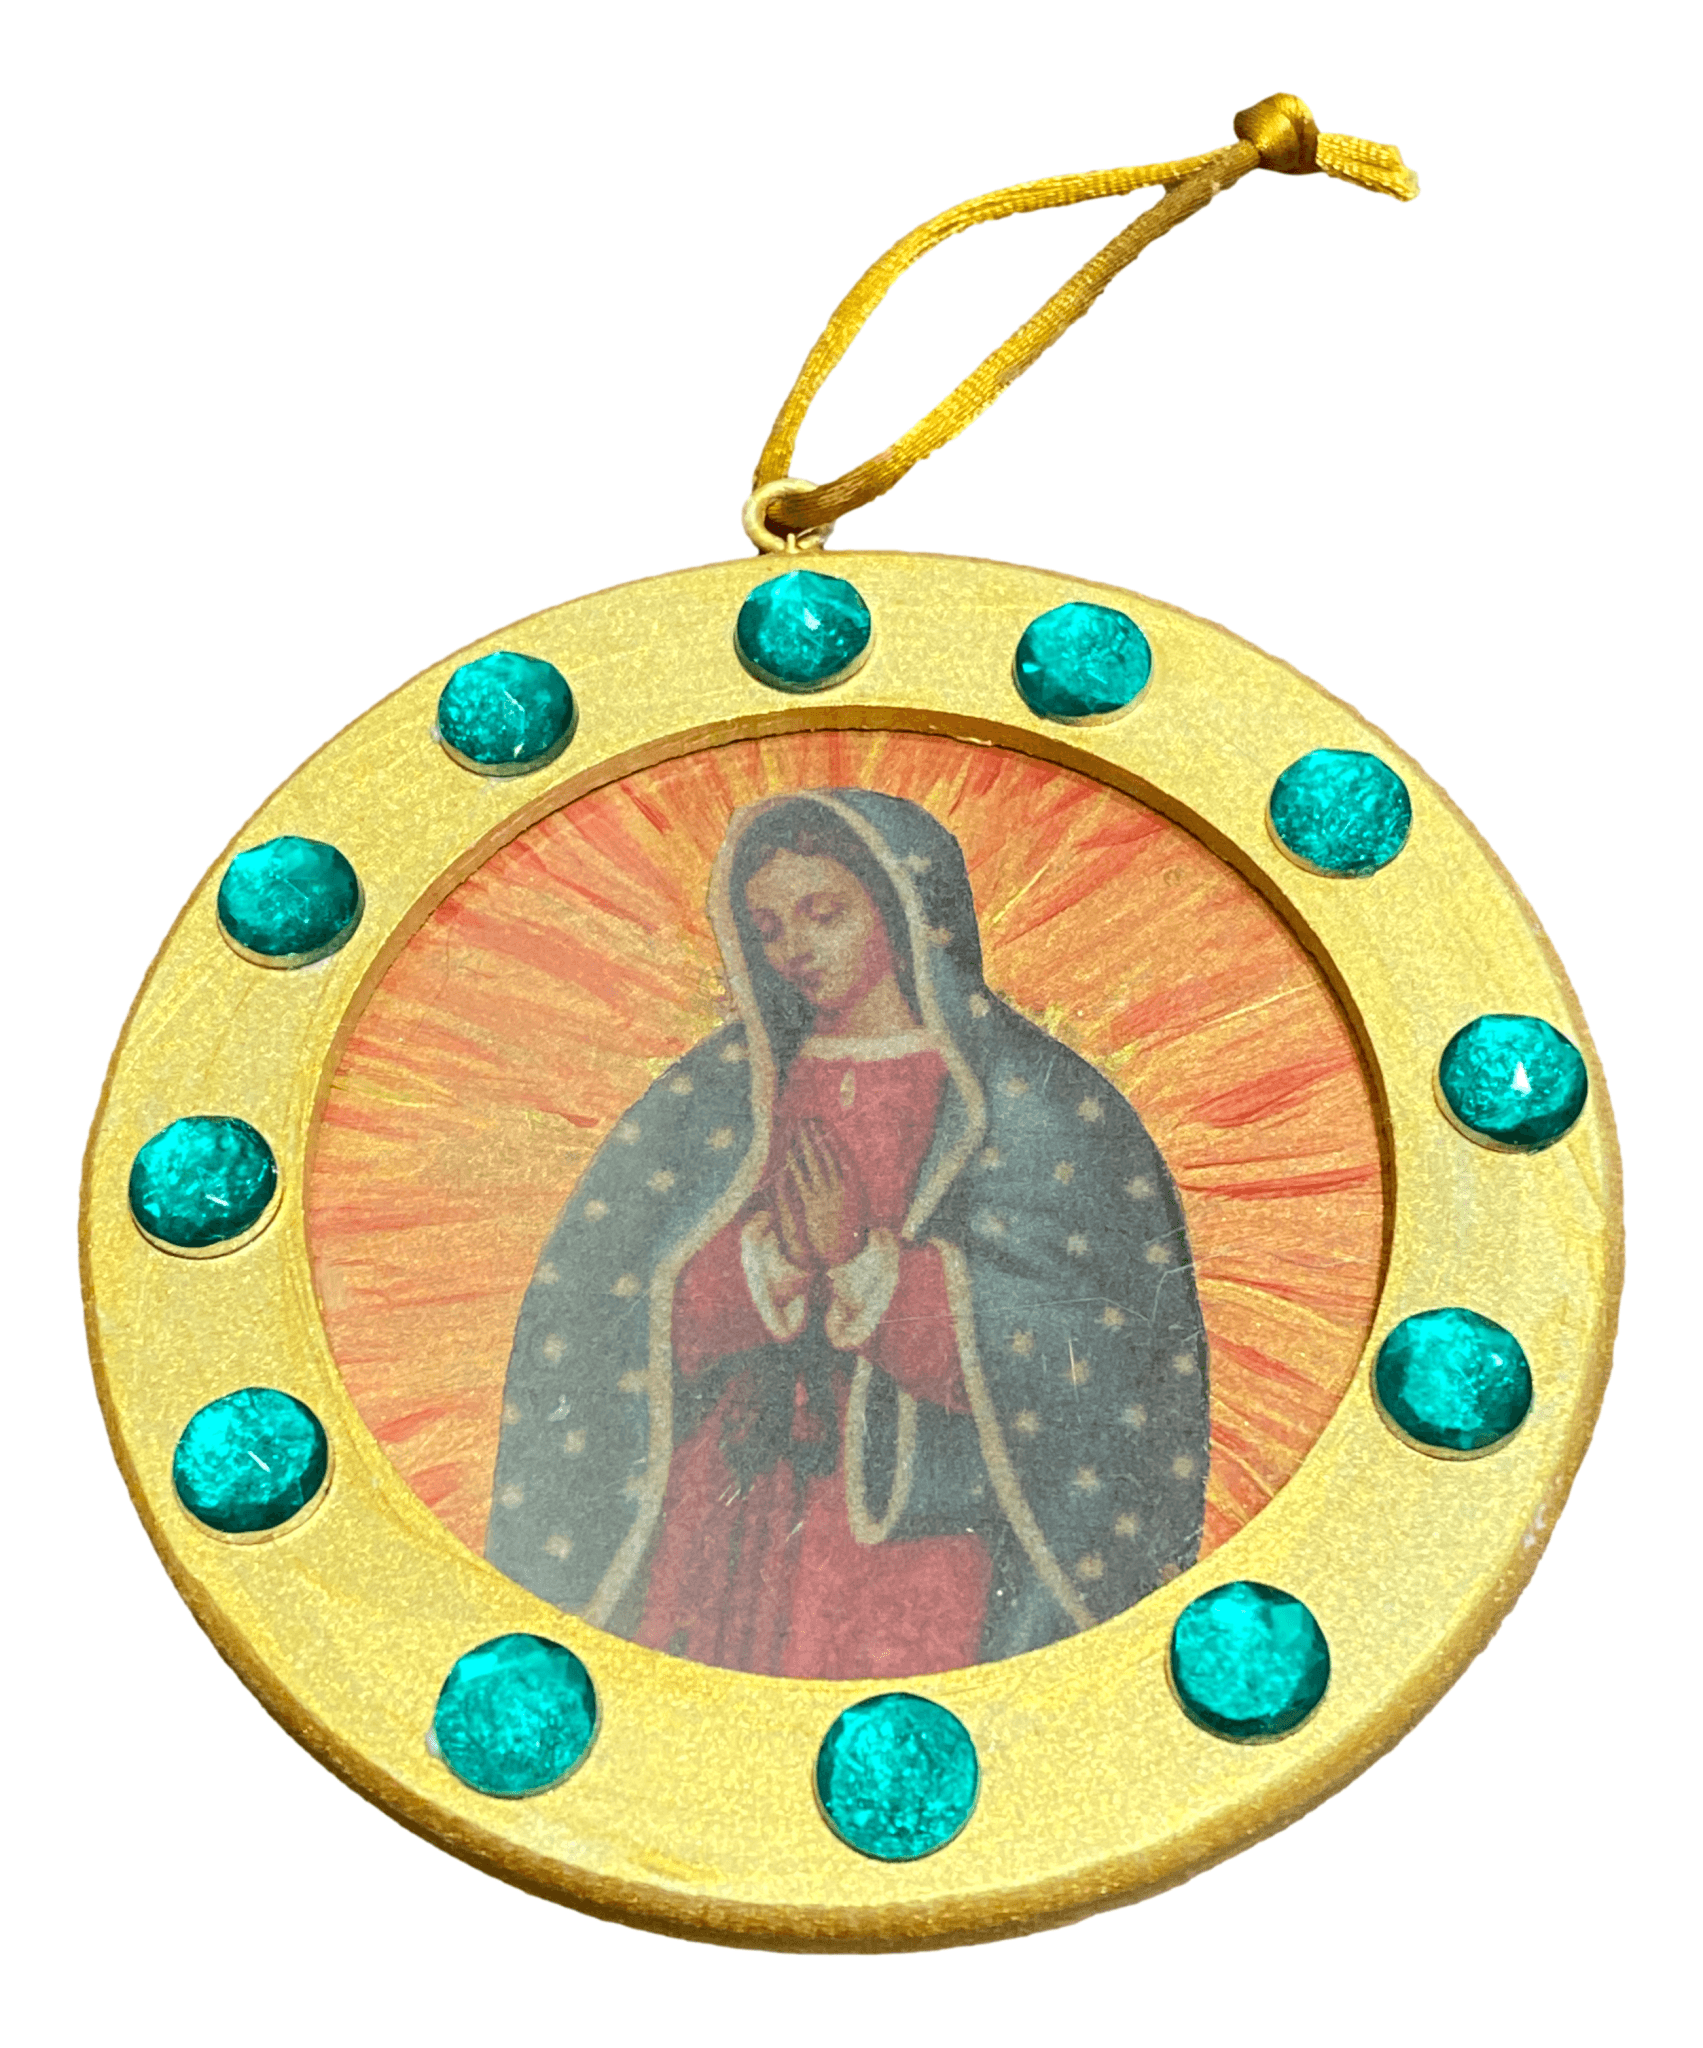 Ornament Frame Round Rhinestone Embellishments Virgen de Guadalupe Handcrafted by Local Artist Ramon Approximate Diameter: 3.9 inches - Ysleta Mission Gift Shop- VOTED El Paso's Best Gift Shop